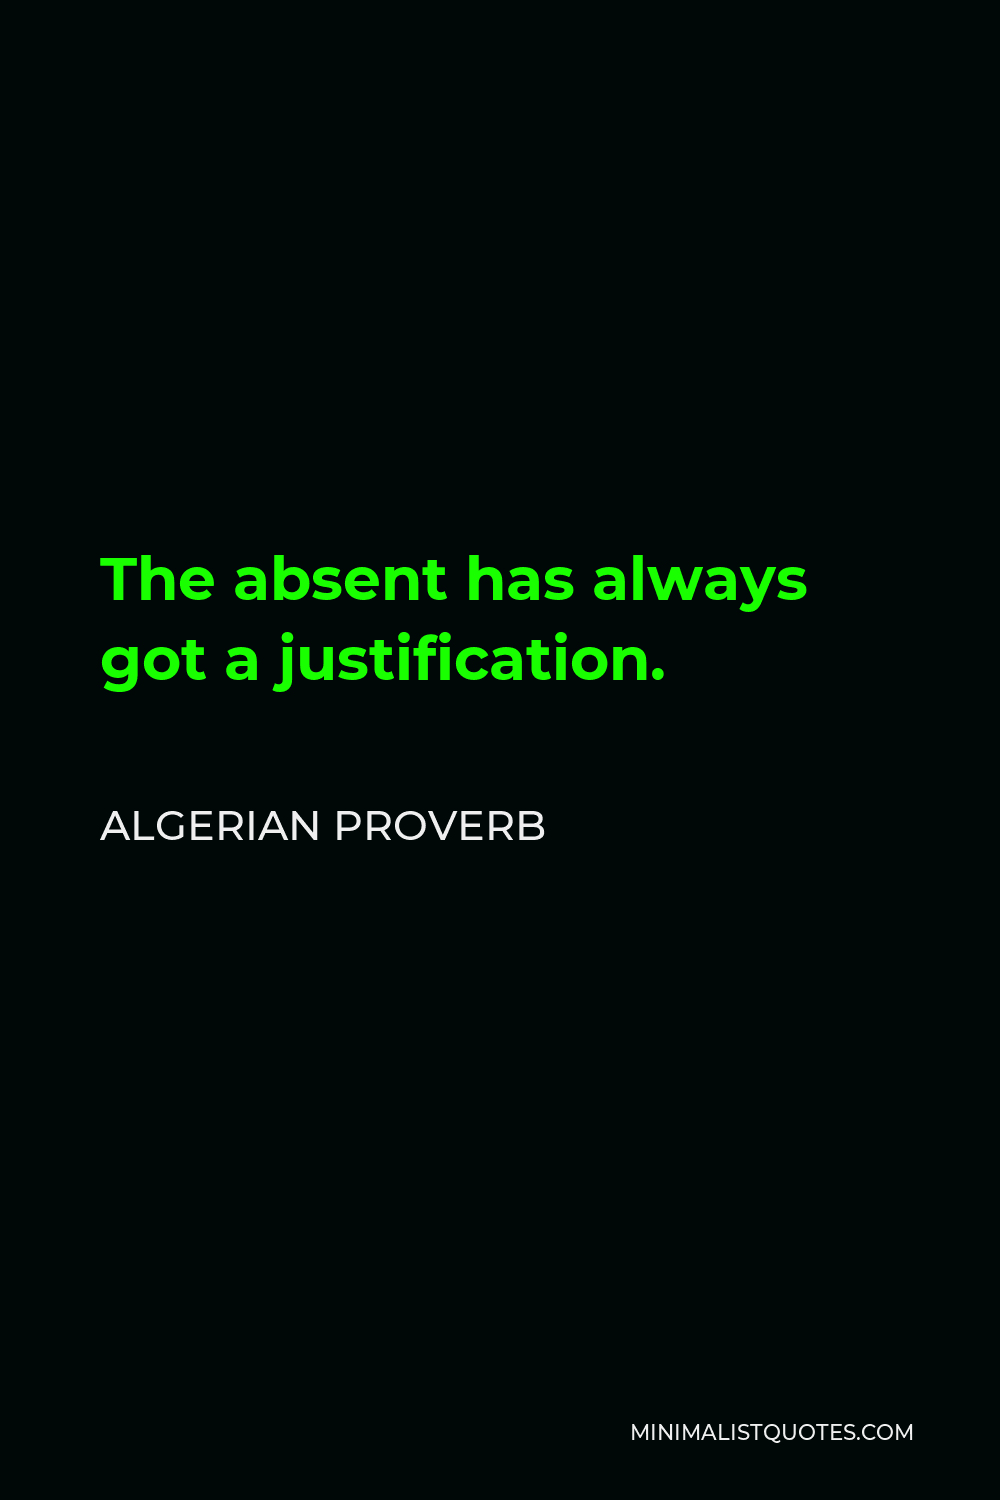 Algerian Proverb Quote - The absent has always got a justification.